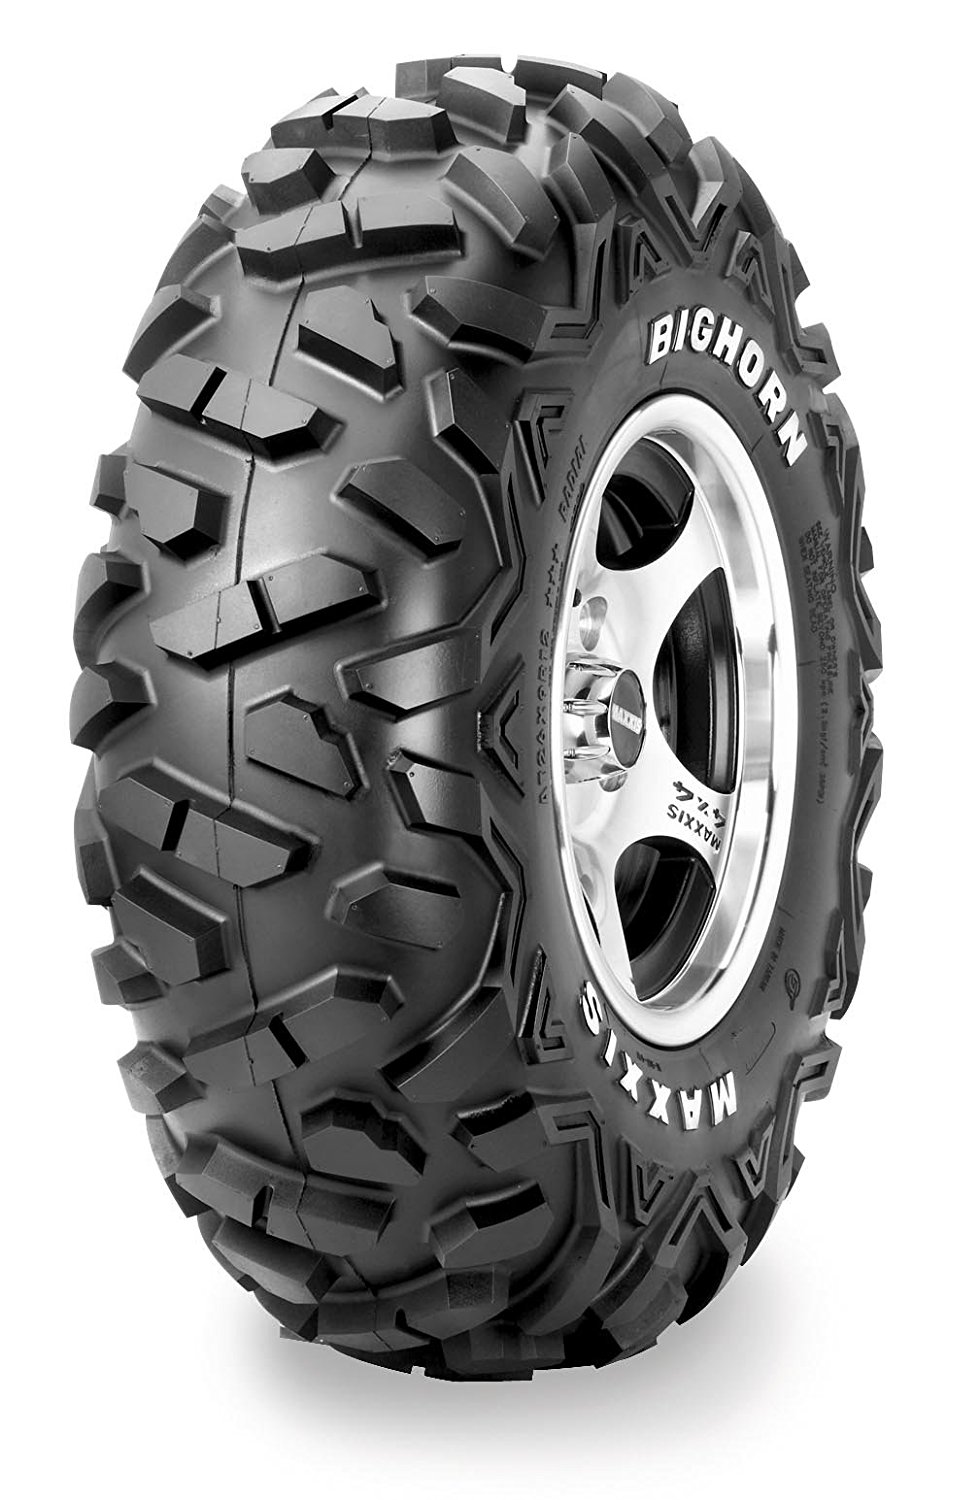 Gomme Nuove Maxxis 26/8 R12 44N BIG HORN M-917 pneumatici nuovi Estivo